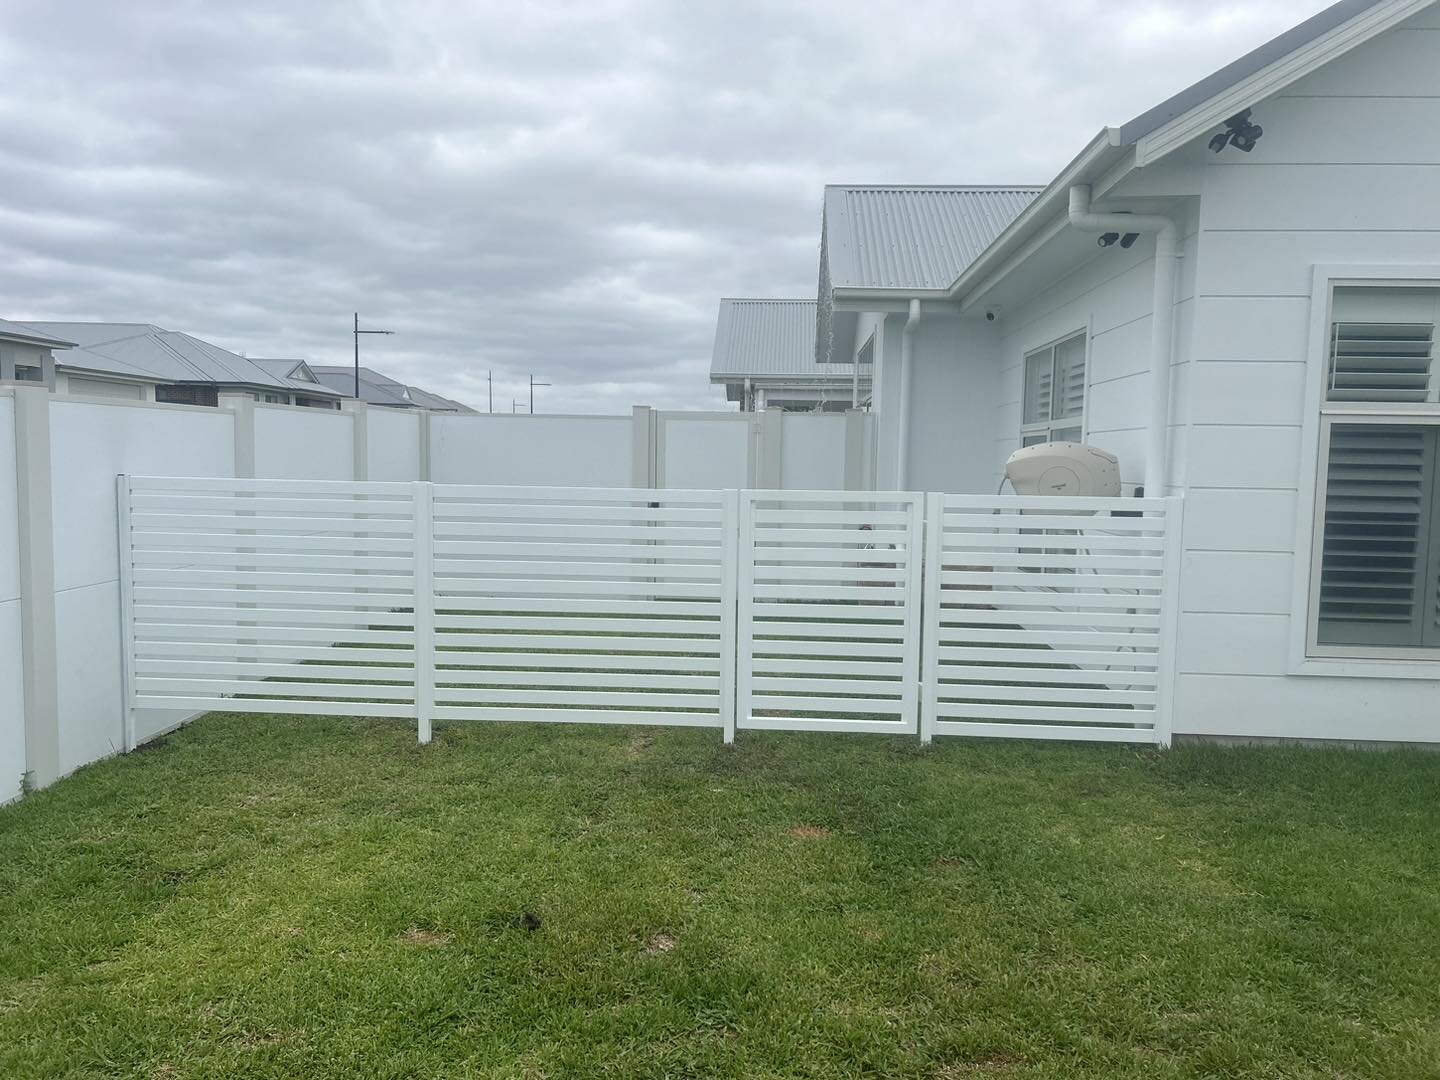 Fabricated and installed this Pearl White Slat fence for a lovely local family to be used as an area for their new pup when entertaining. All fabricated in house using 65x16 RHS for the salts and concealed fixing channels to add a seamless look. If y